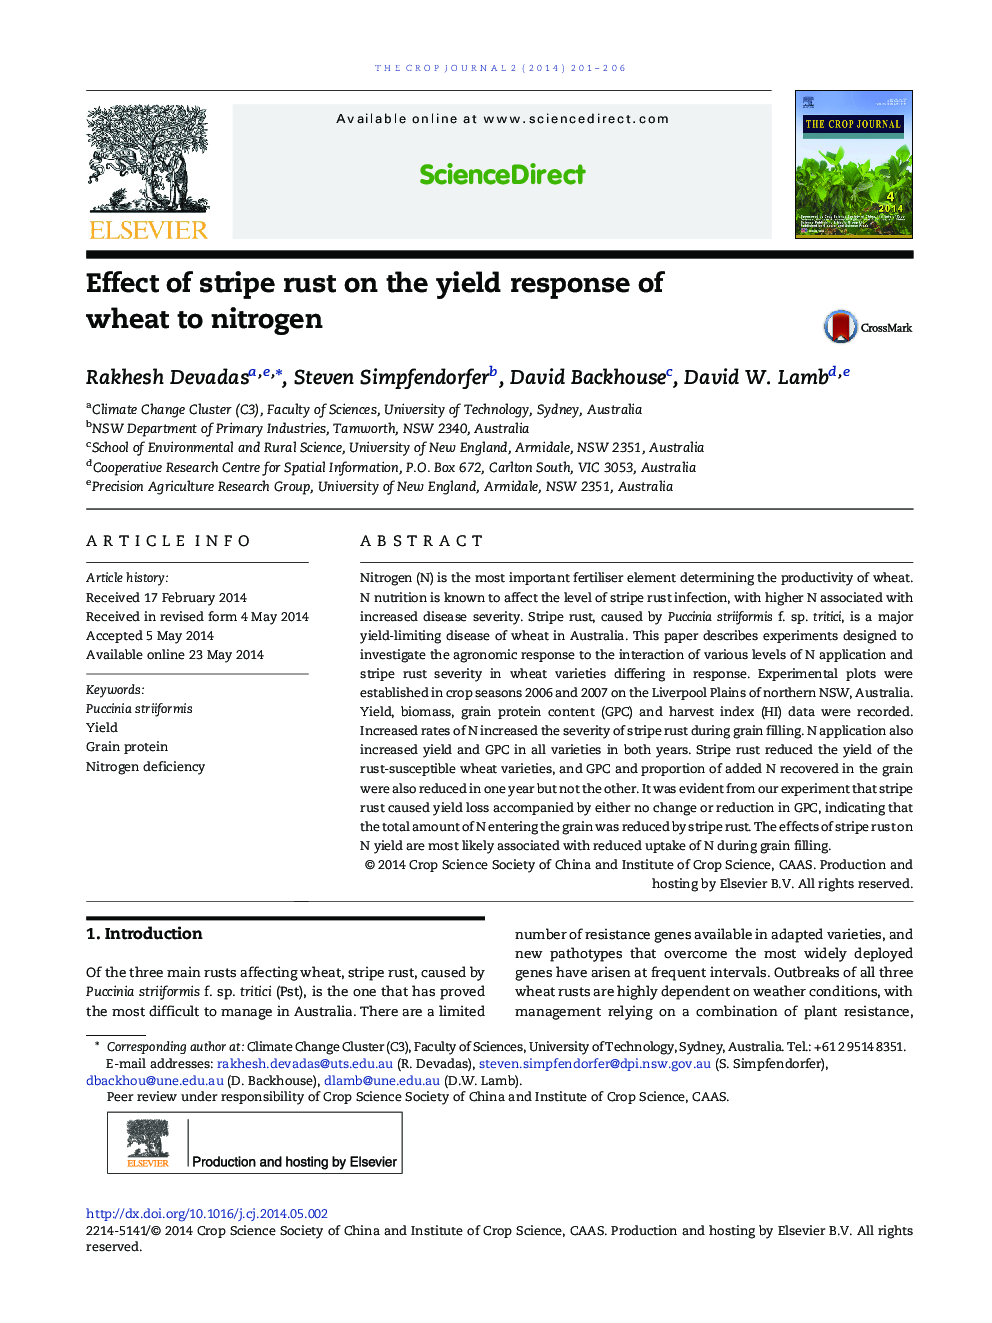 Effect of stripe rust on the yield response of wheat to nitrogen 